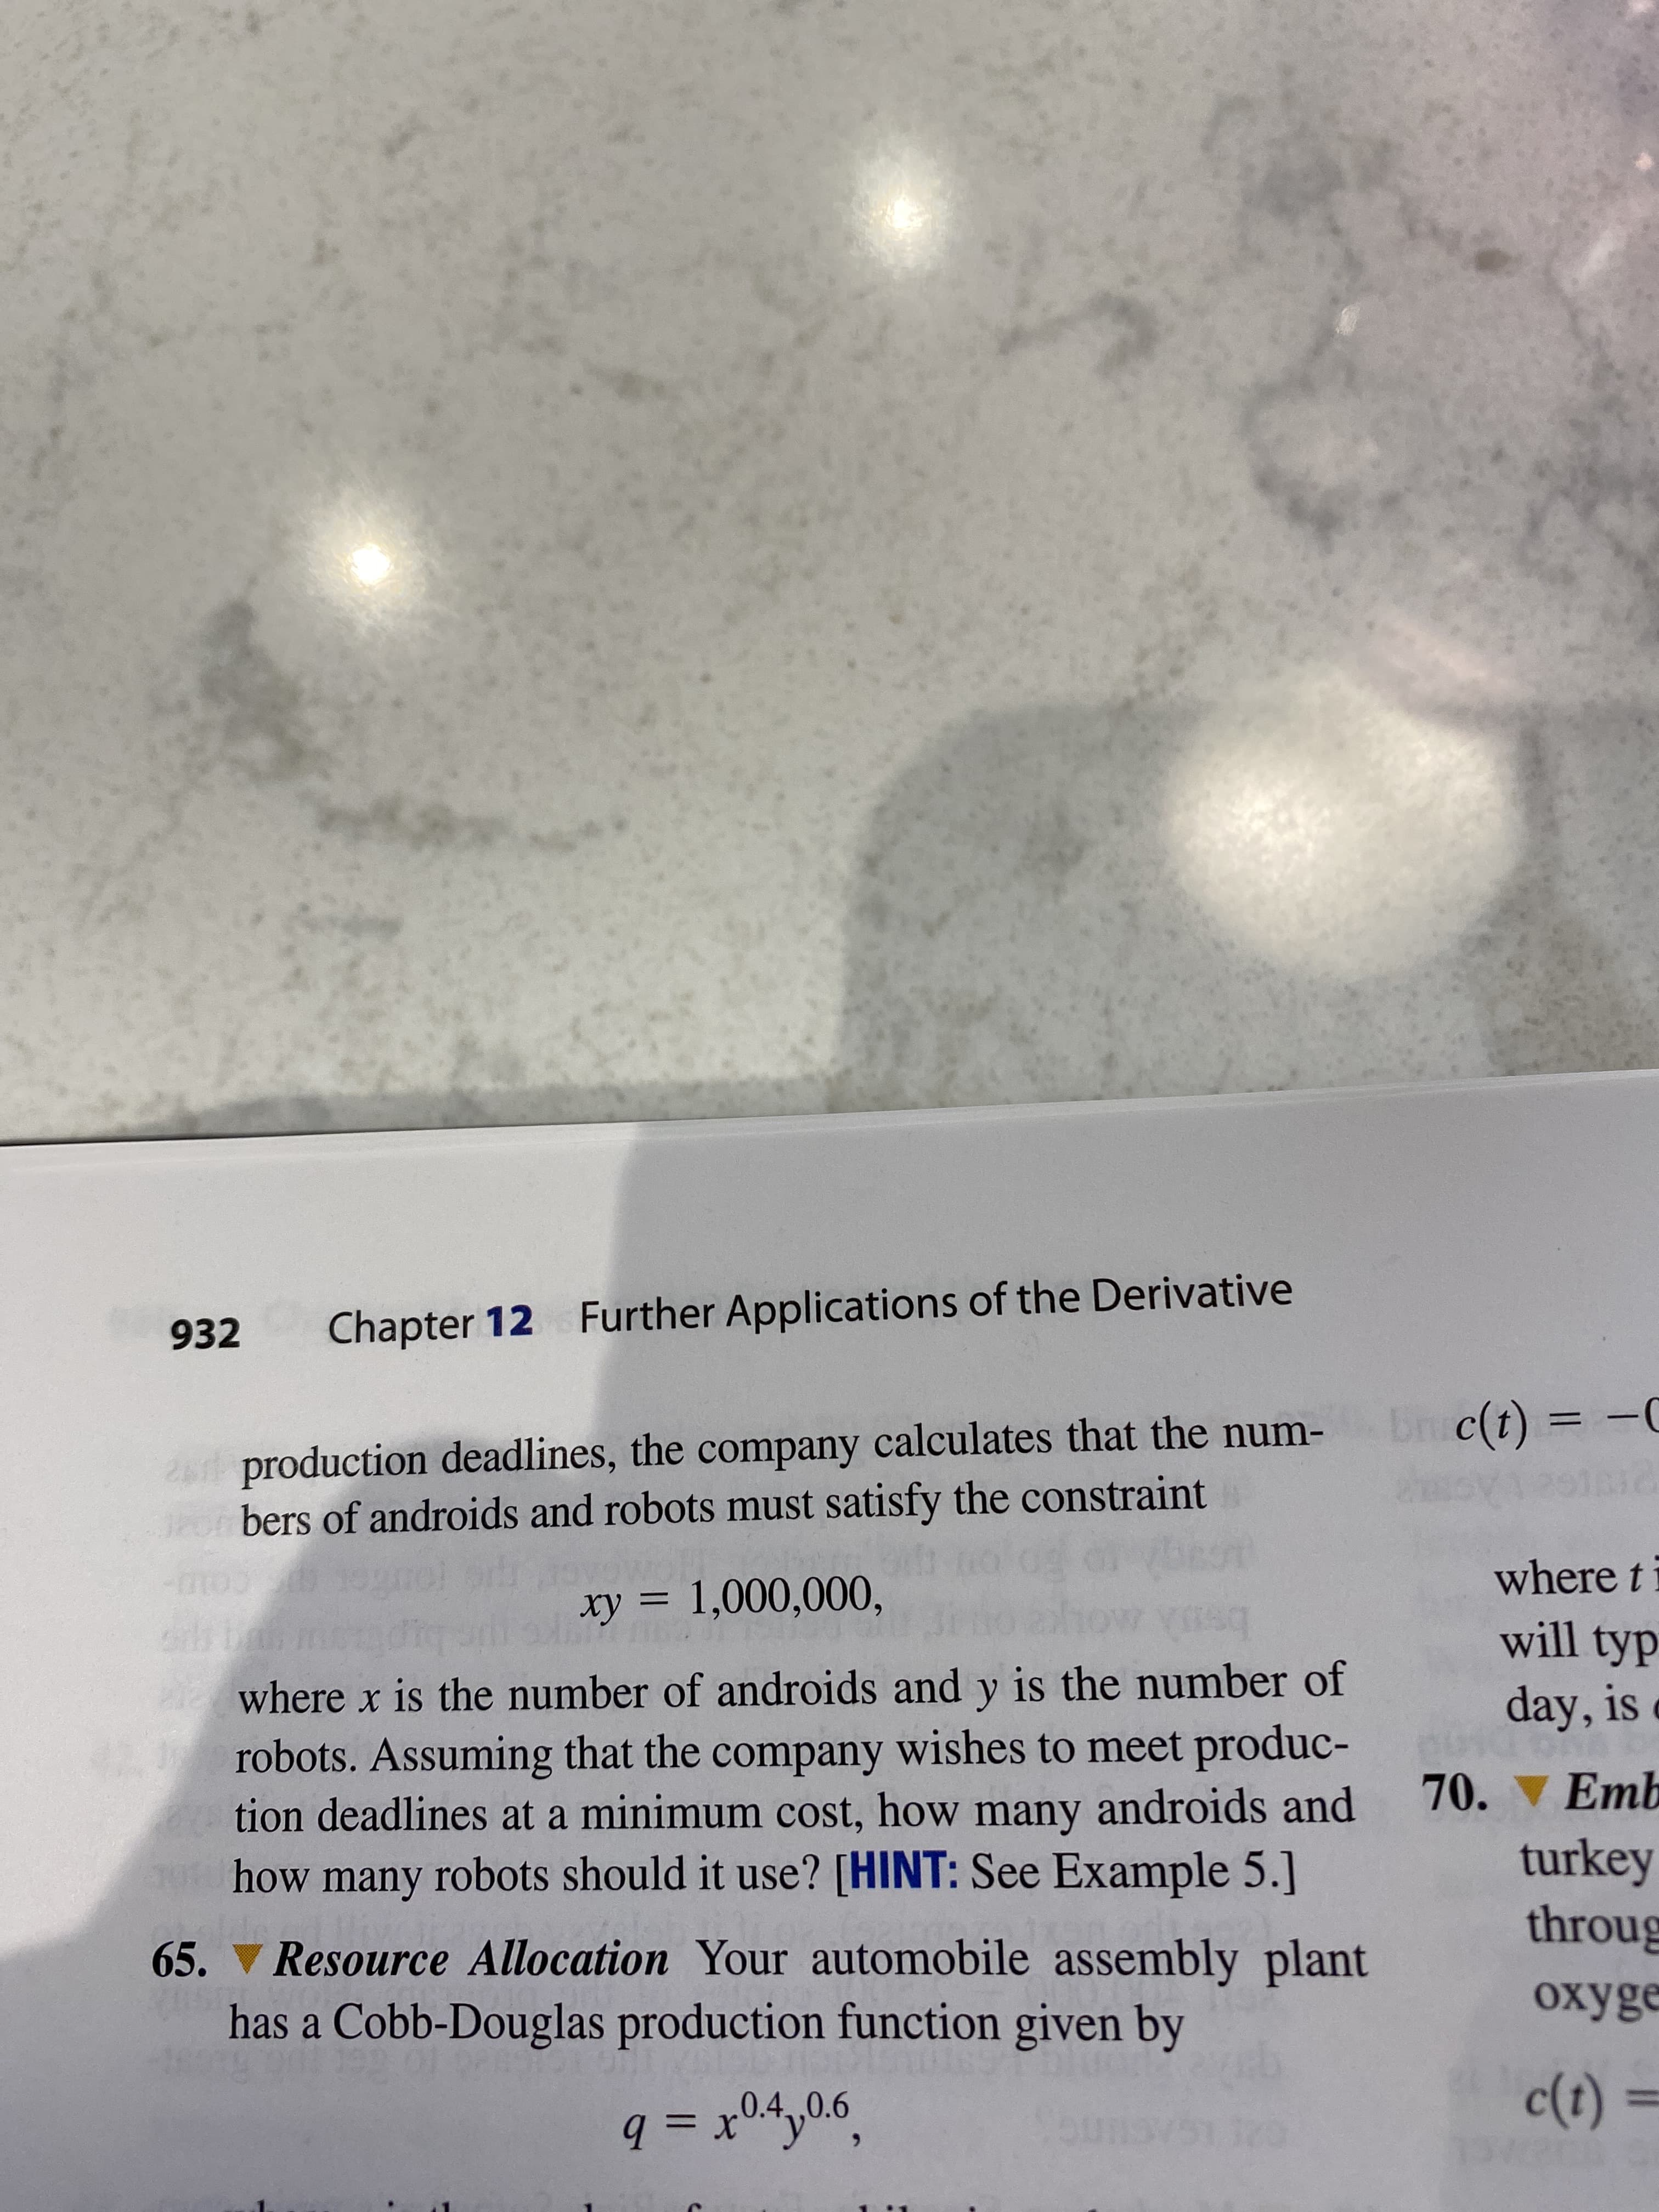 932
Chapter 12 Further Applications of the Derivative
production deadlines, the company calculates that the num- br c(t) = -C
o bers of androids and robots must satisfy the constraint
where t
xy = 1,000,000,
%3D
will typ
where x is the number of androids and y is the number of
robots. Assuming that the company wishes to meet produc-
tion deadlines at a minimum cost, how many androids and
how many robots should it use? [HINT: See Example 5.]
day, is
70. ▼ Emb
turkey
throug
65. V Resource Allocation Your automobile assembly plant
охyge
has a Cobb-Douglas production function given by
q = x04,0.6,
c(t) :
